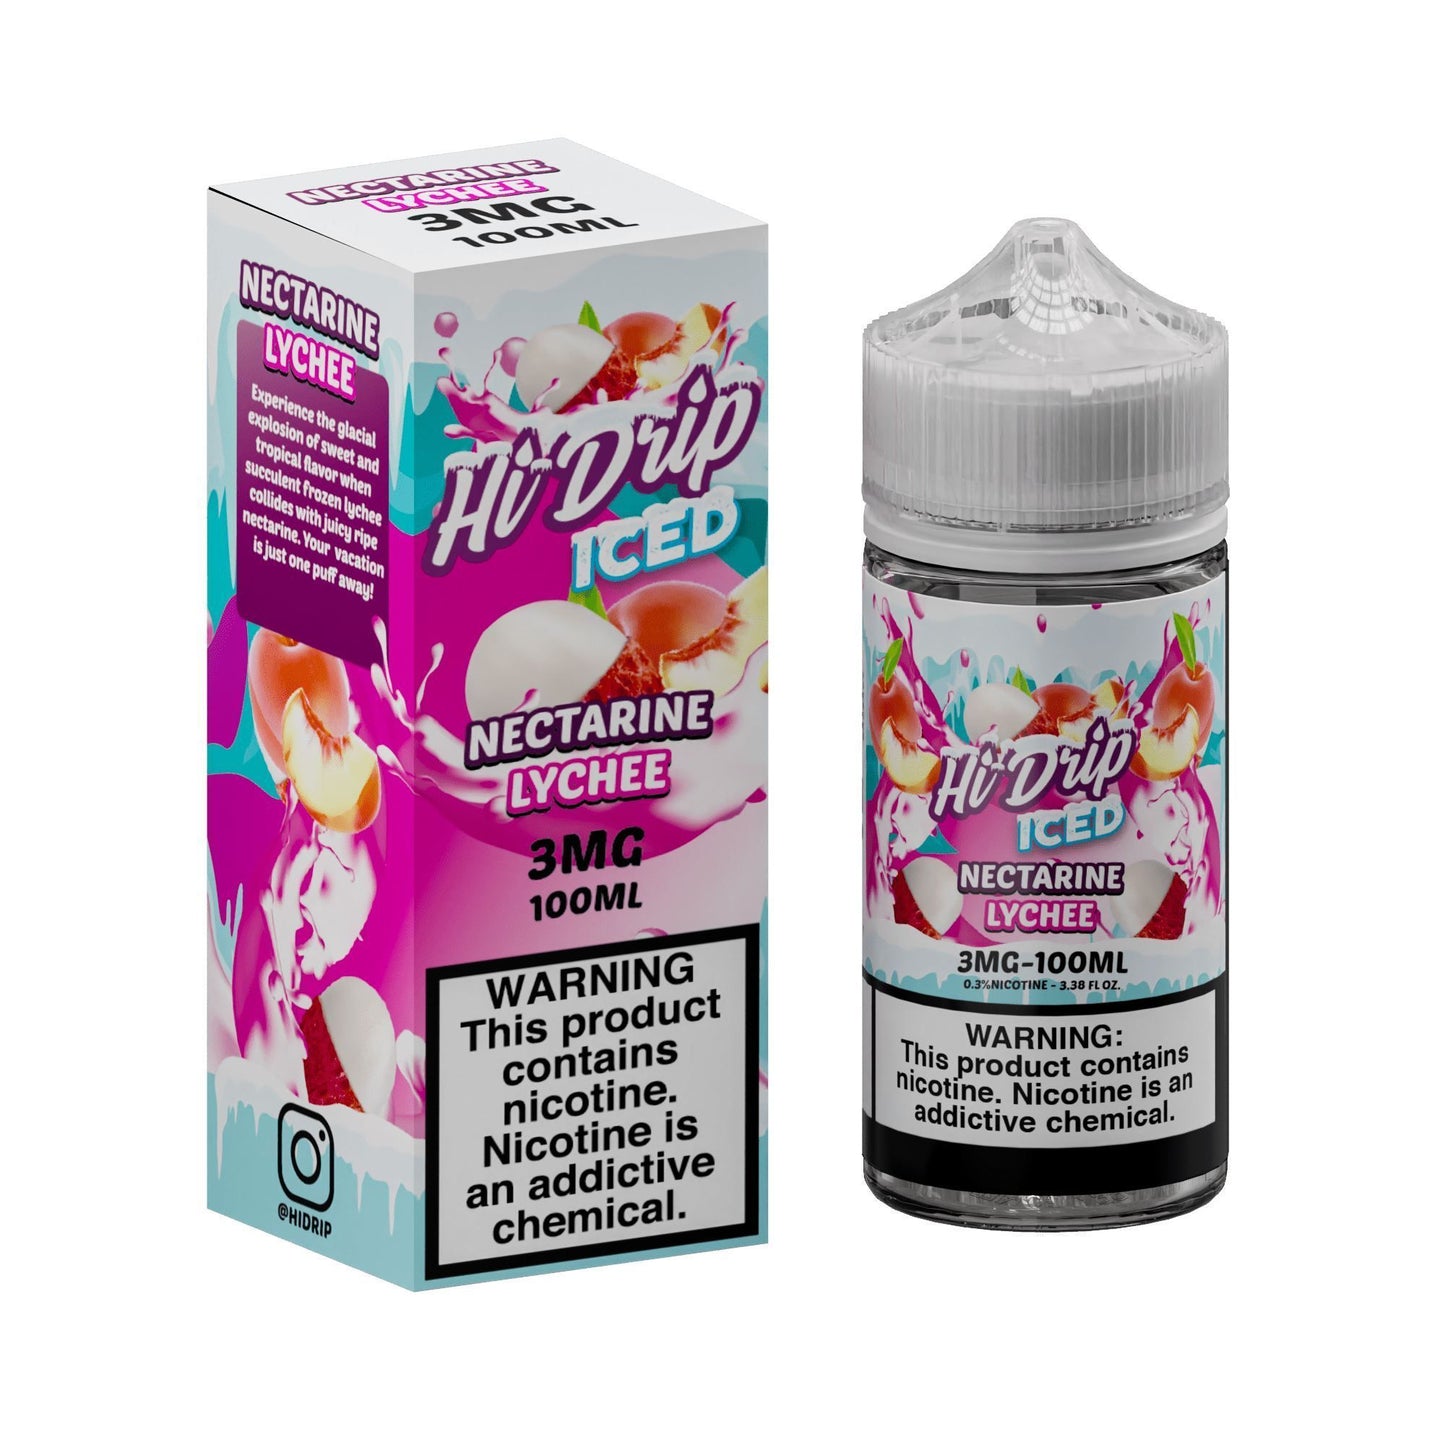 Nectarine Lychee Iced by Hi-Drip Series 100mL with Packaging